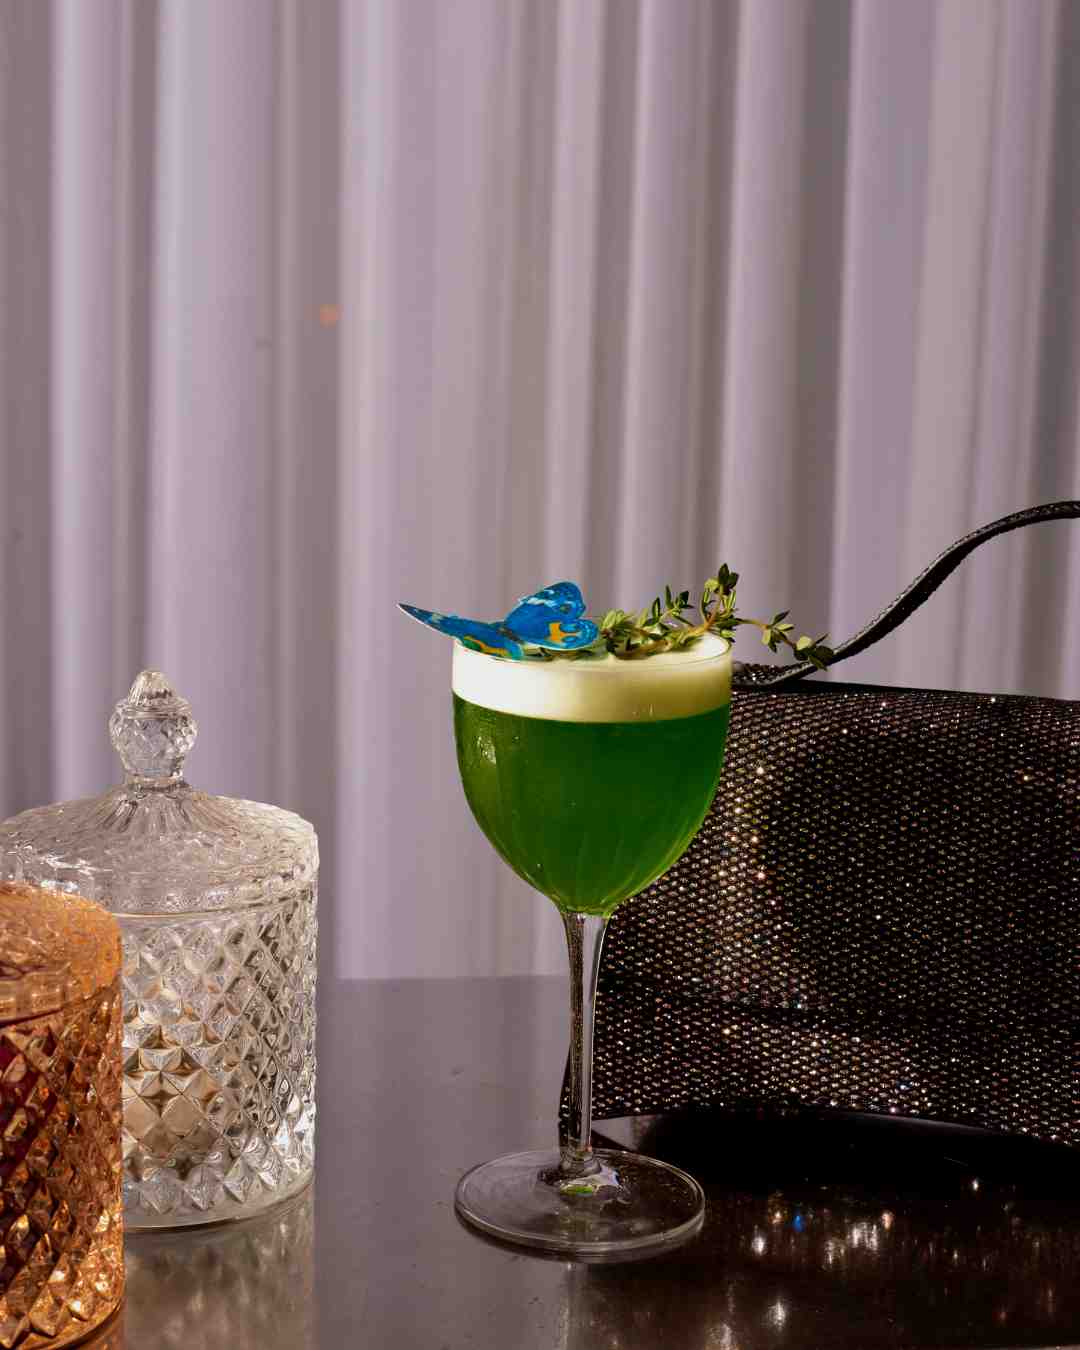 Green cocktail and small grey handbag with glassware on a silver bar table with white curtains in the background